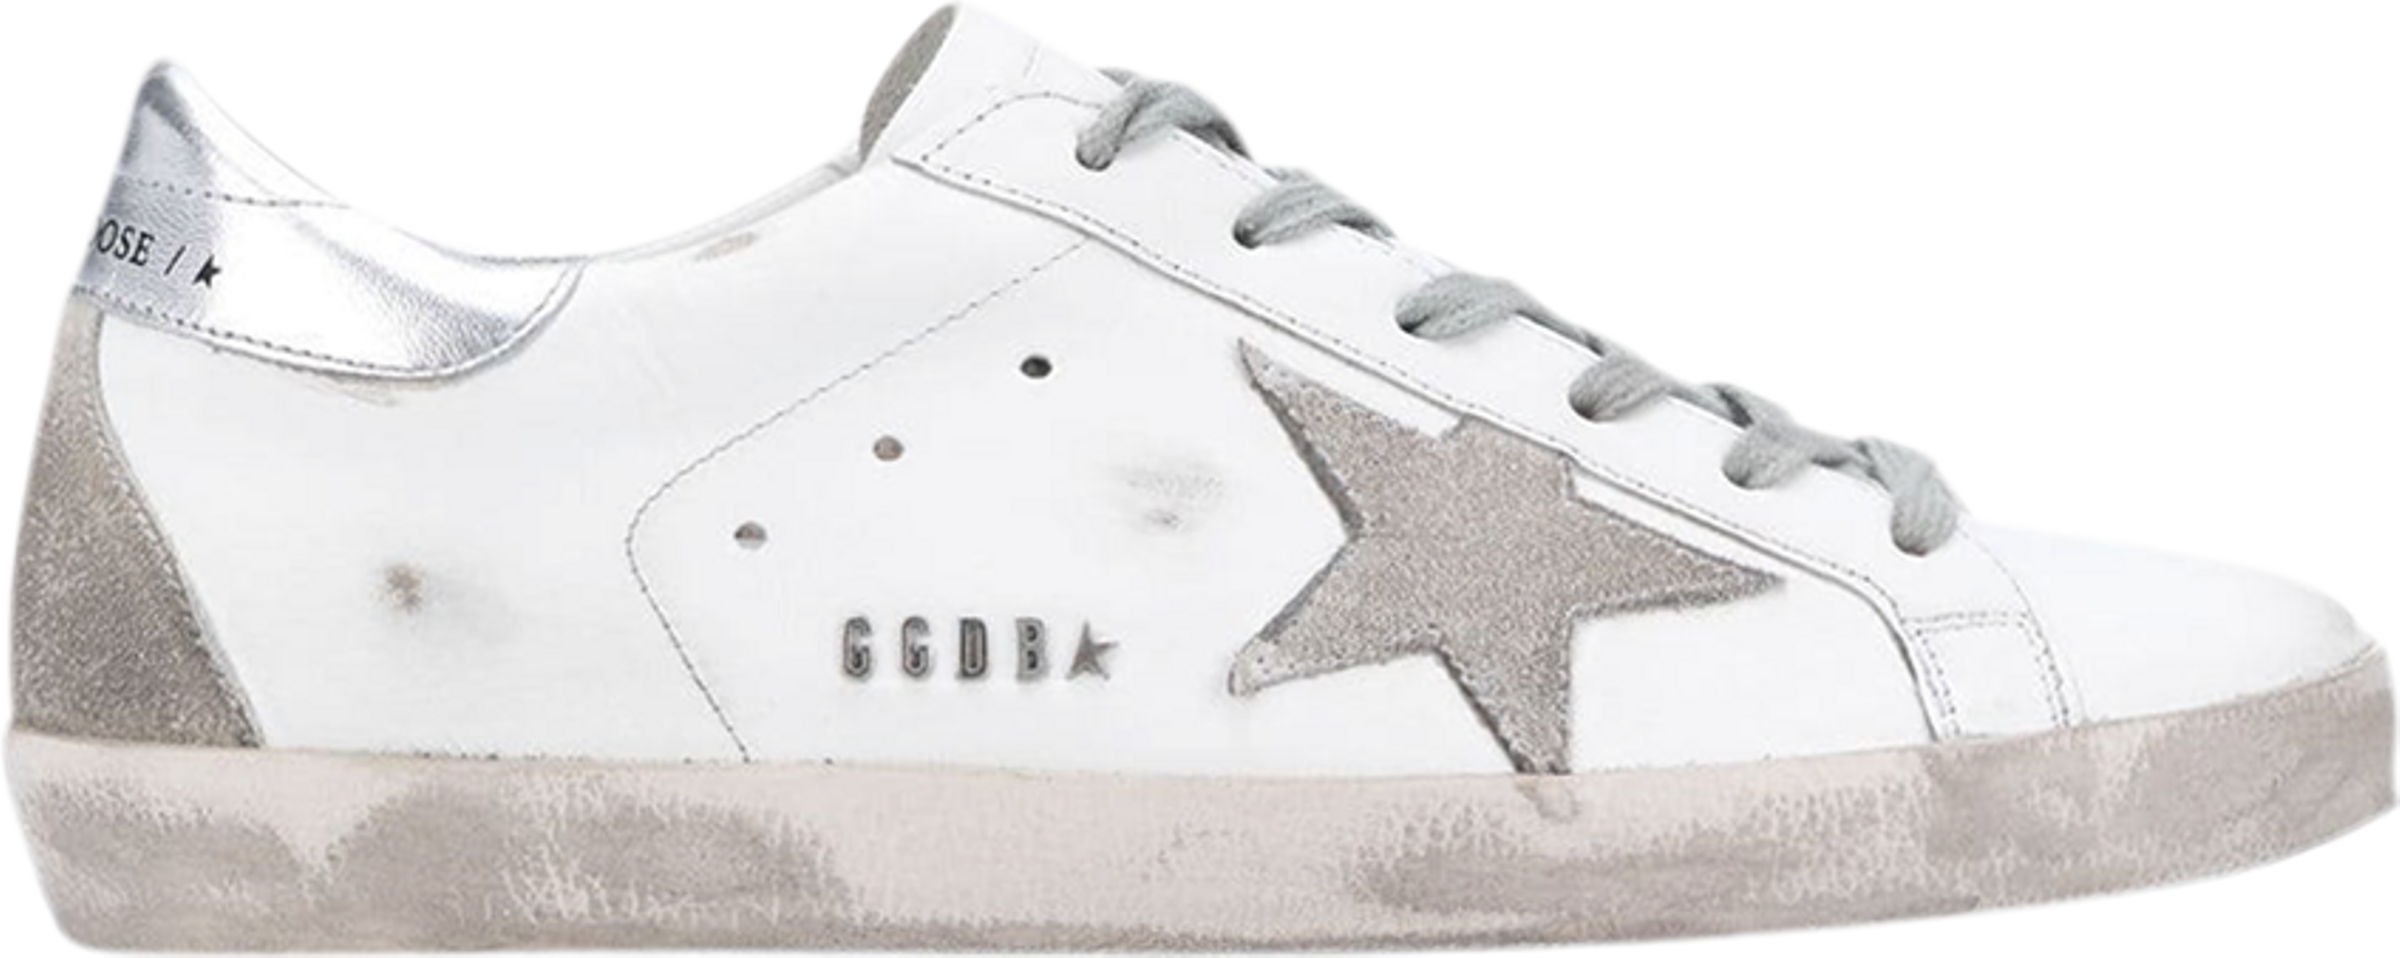 Buy Golden Goose Wmns Superstar 'White Ice Silver' - GWF00102 F000317 ...